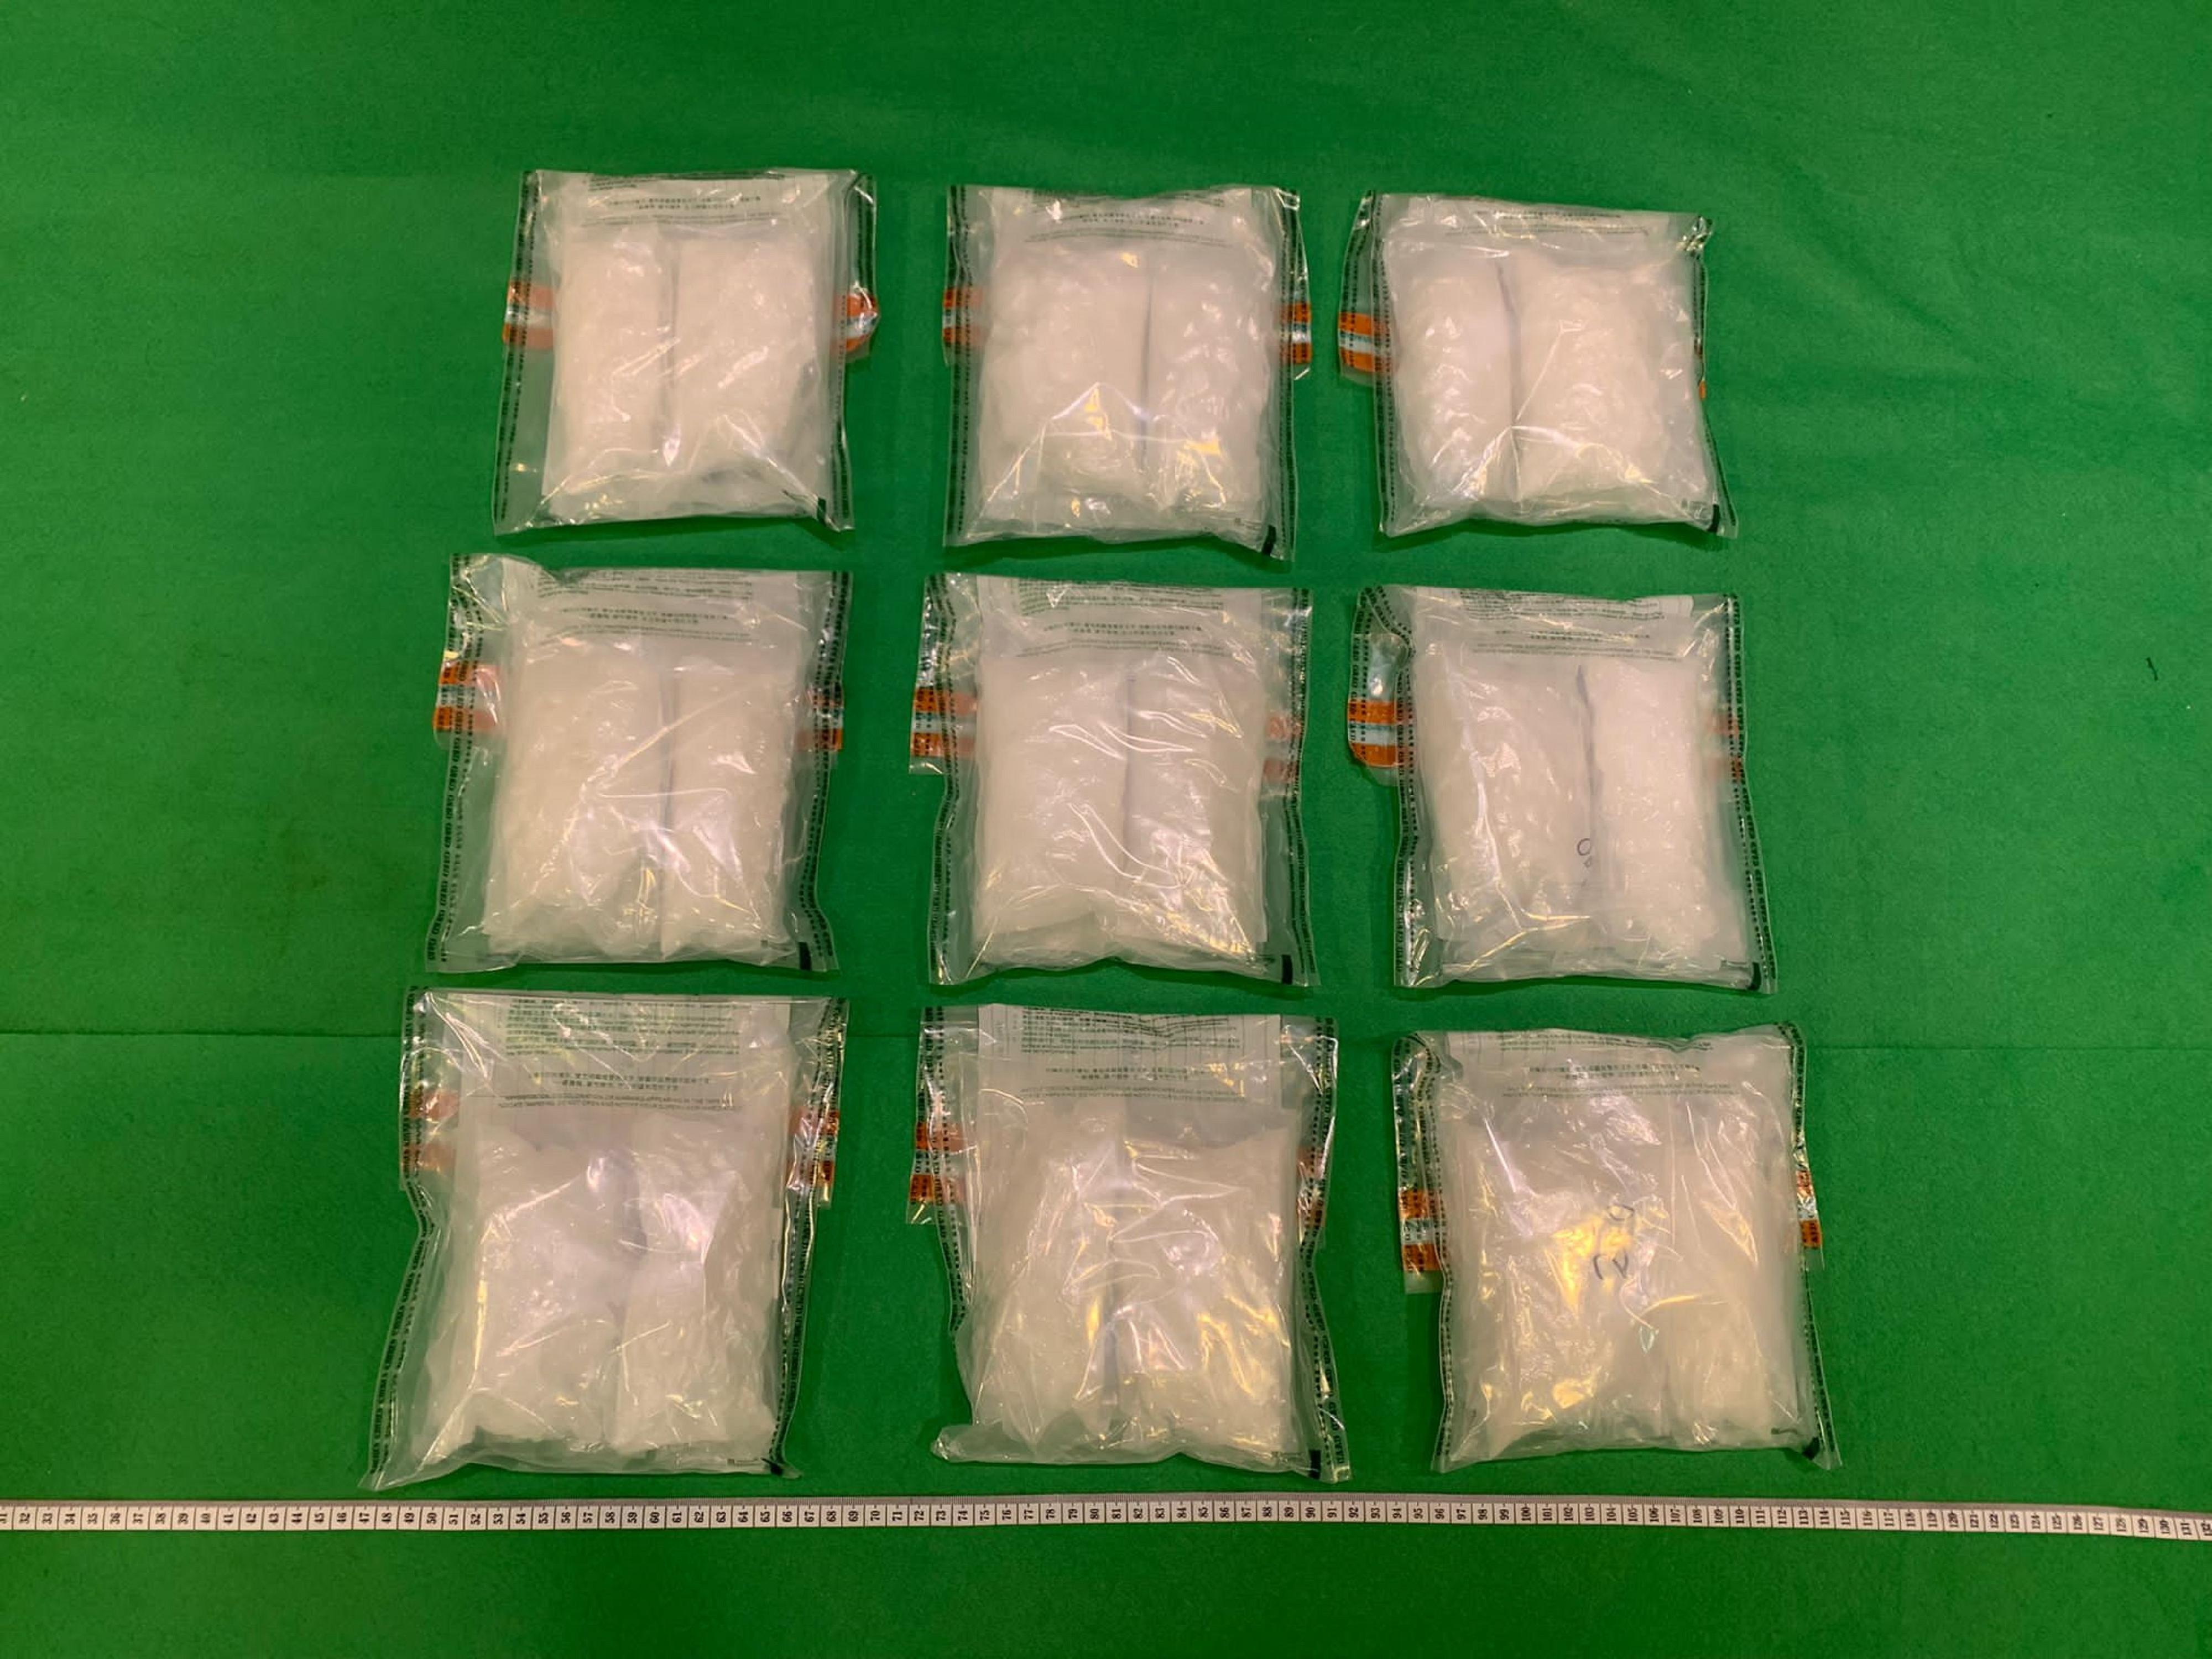 Hong Kong Customs on August 9 and 15 and yesterday (September 7) seized about 12 kilograms of suspected methamphetamine and about 570 grams of suspected heroin, with an estimated market value of about $6.9 million and about $680,000 respectively, in Hong Kong International Airport, Tuen Mun, Kwai Chung, Mong Kok and San Po Kong. Photo shows the suspected methamphetamine seized by Customs officers in the airport.